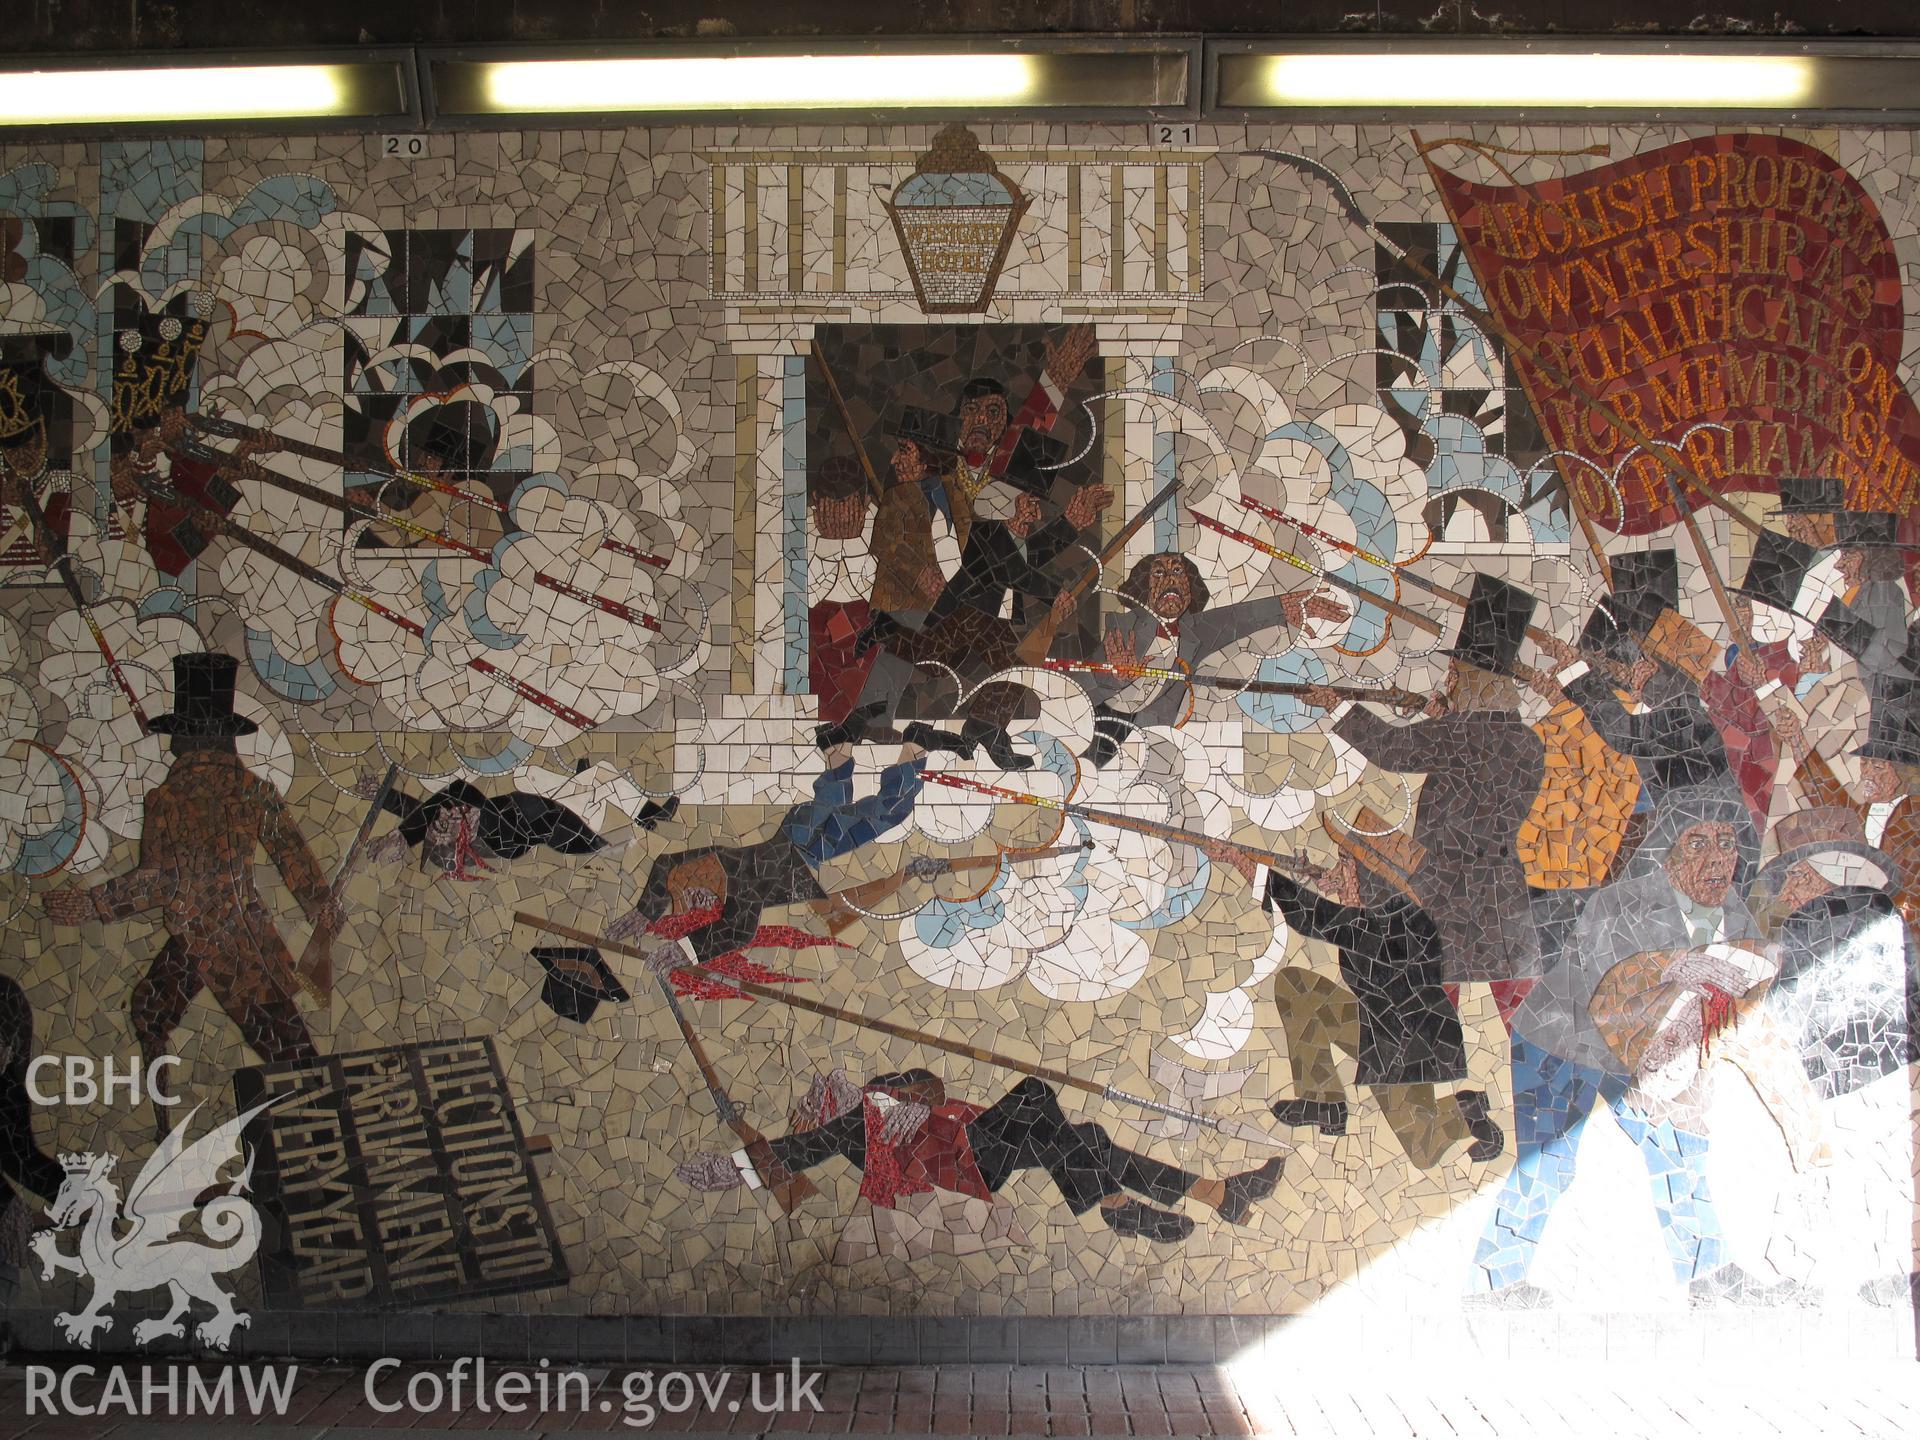 Chartist Uprising Mural, Newport, taken by Brian Malaws on 01 March 2010.